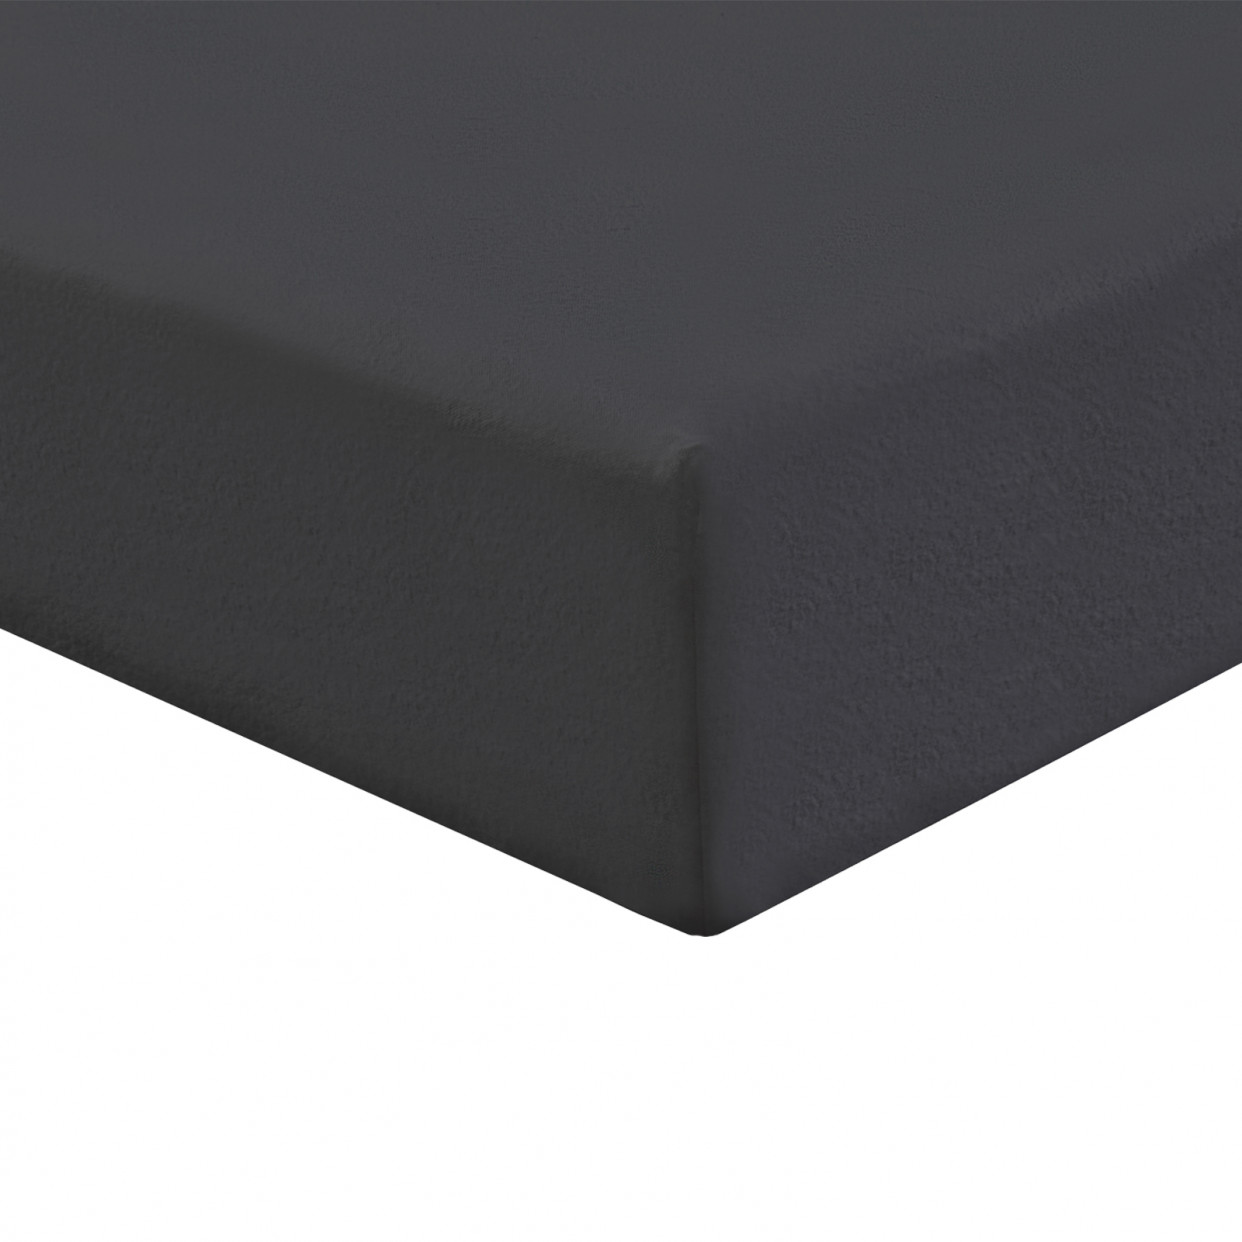 Highams 100% Cotton Fitted Bed Sheet, Plain Dye Charcoal Black - Super King>